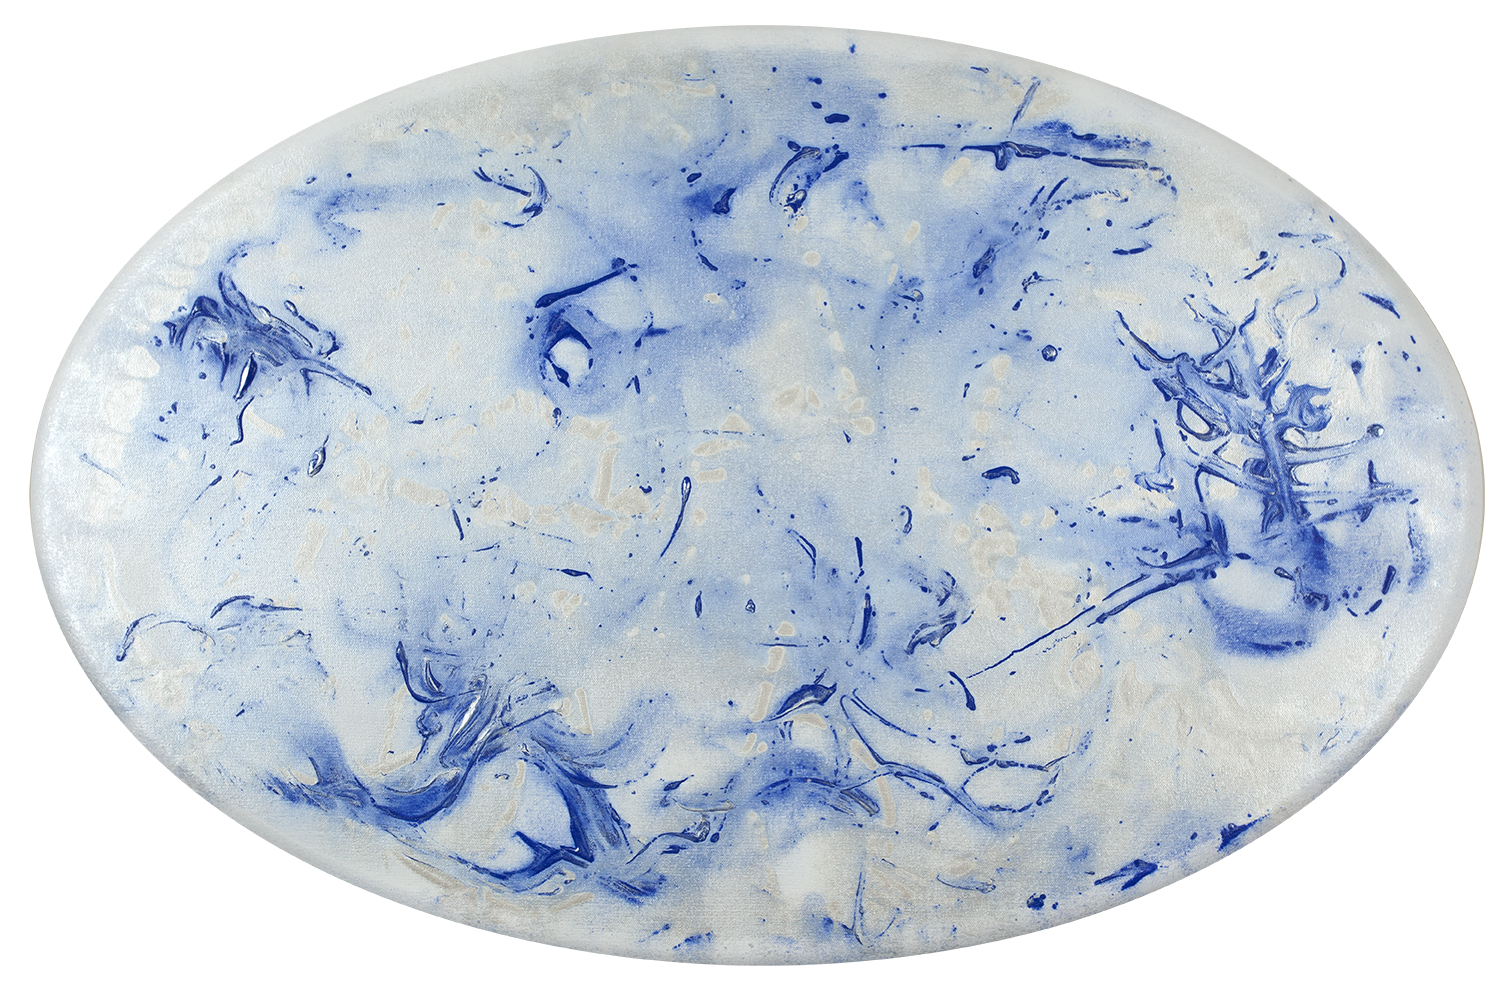 ©2022 Alicia R Peterson, *Dancing with YInMn* Blue. Acrylic on 24 x 36-inch convex oval canvas. Photographer: Peter Scheer.